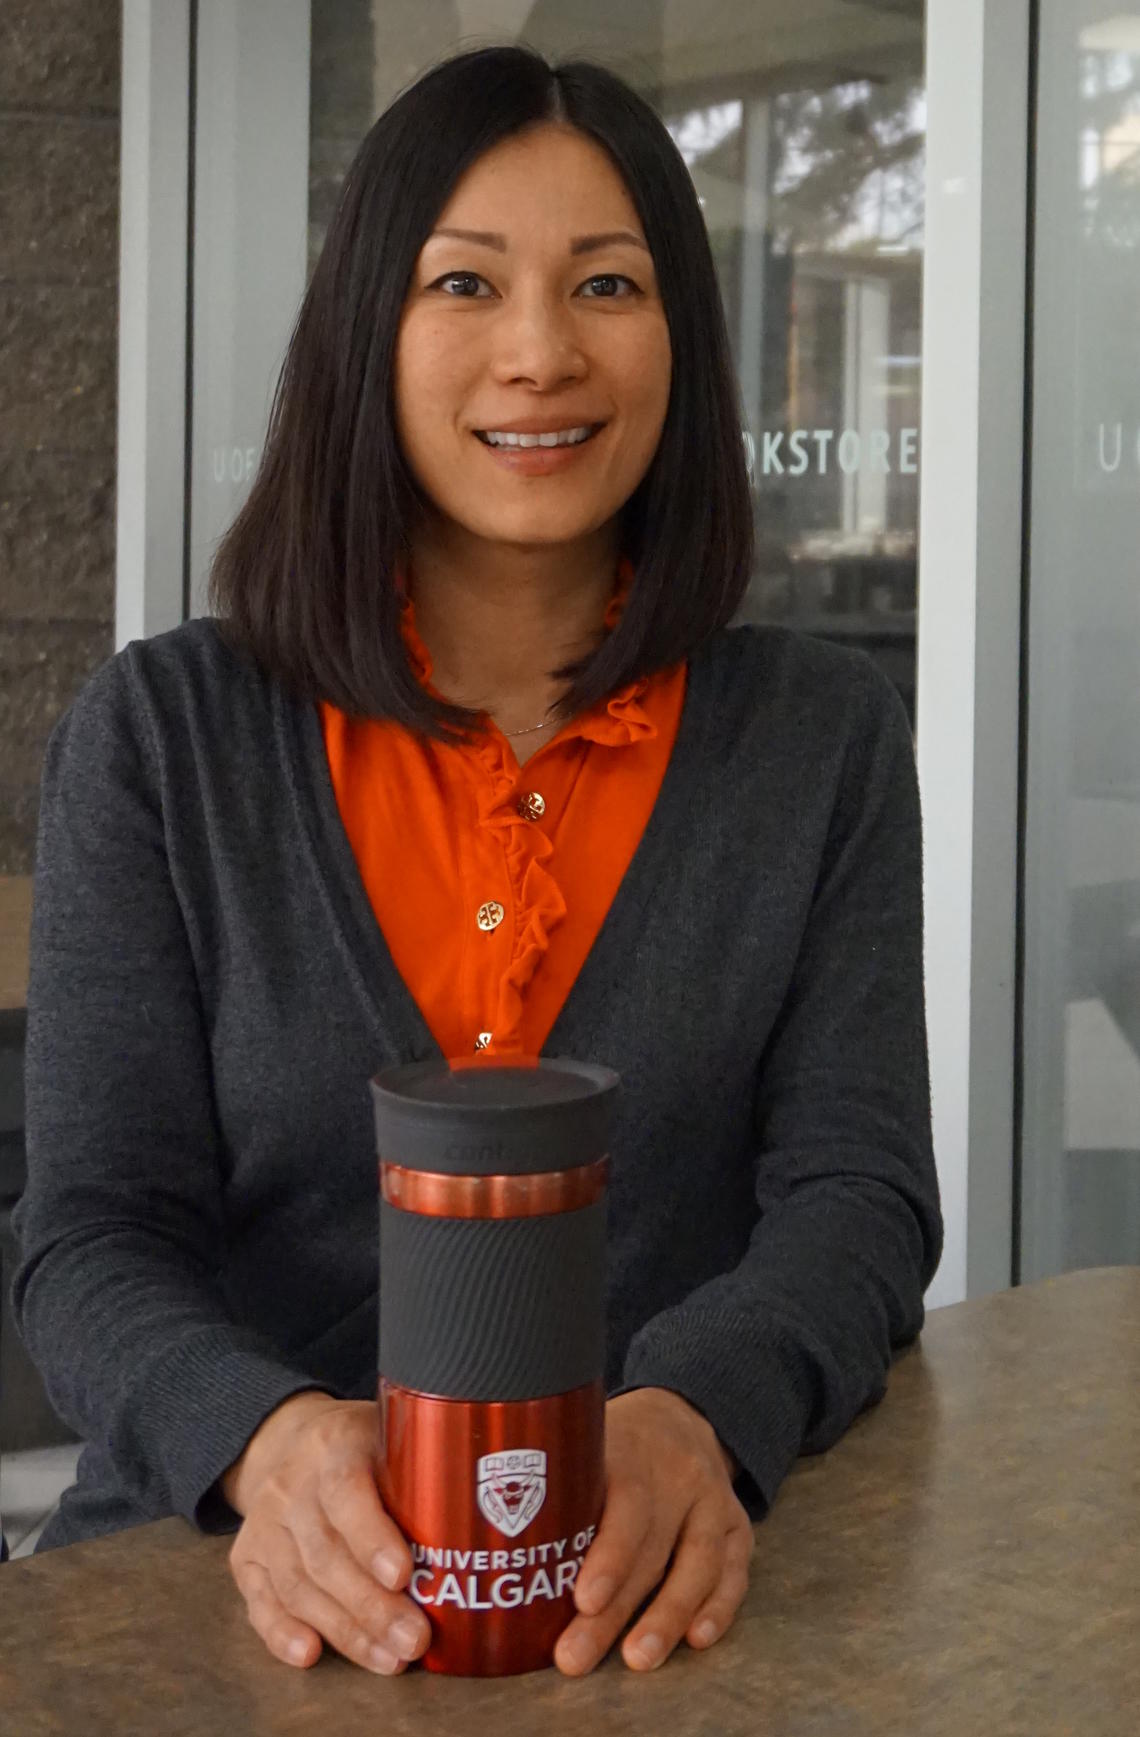 Using the ecofriendly cup she received for presenting at the Women’s Leadership Conference is just one way Gina Ko is doing her part to help the environment.